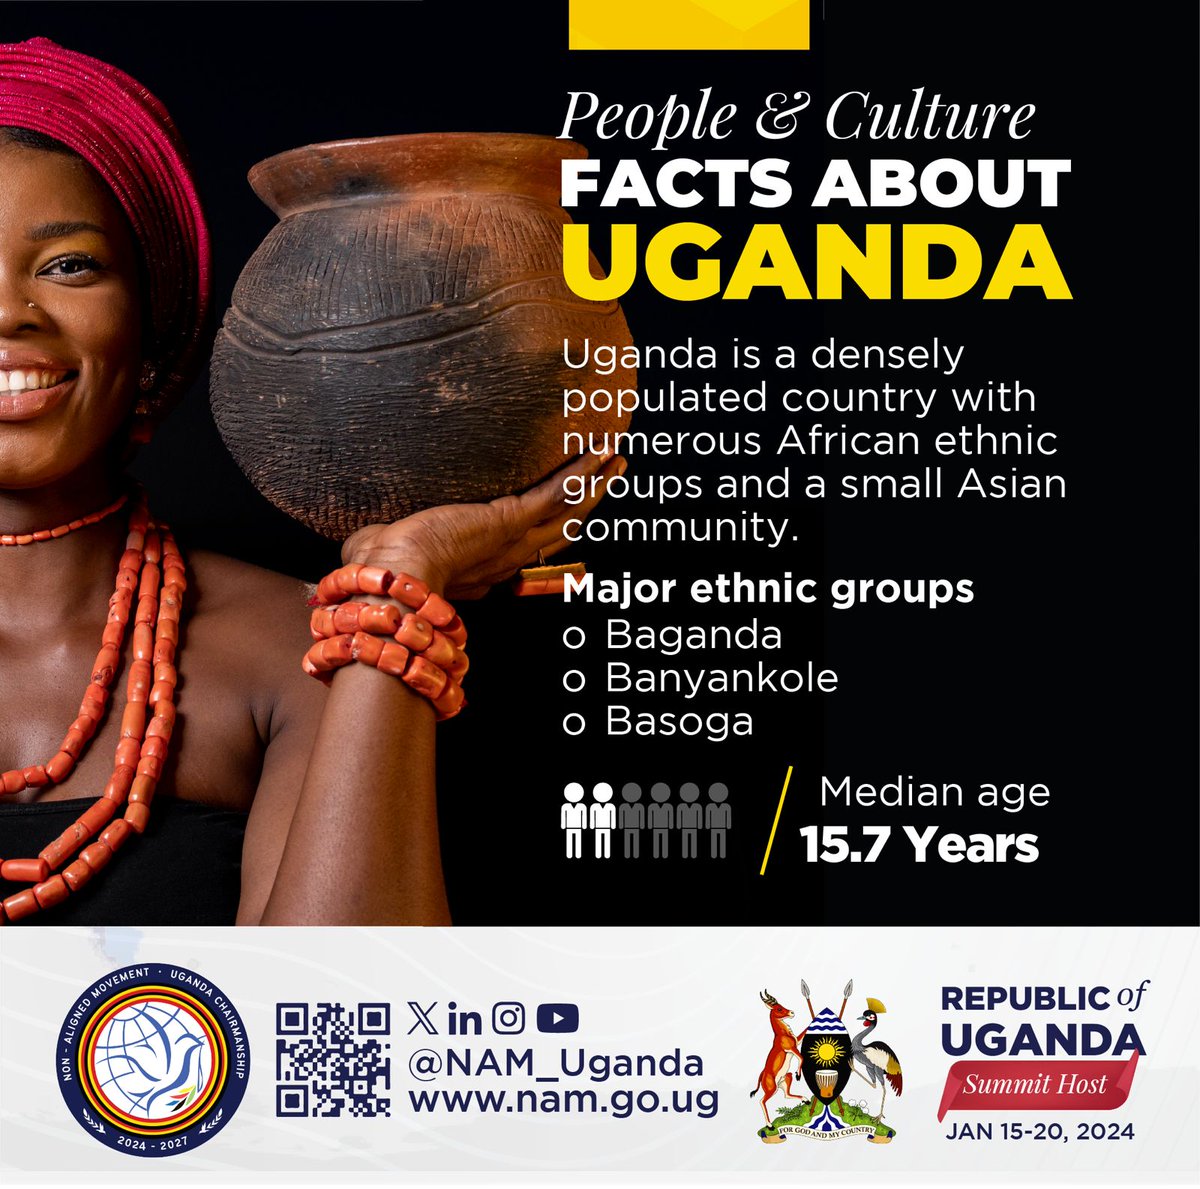 Uganda is a densely populated country with numerous African ethnic groups and a small Asian community. #UgandaIsBlessed
#UgandaThePearlofAfrica